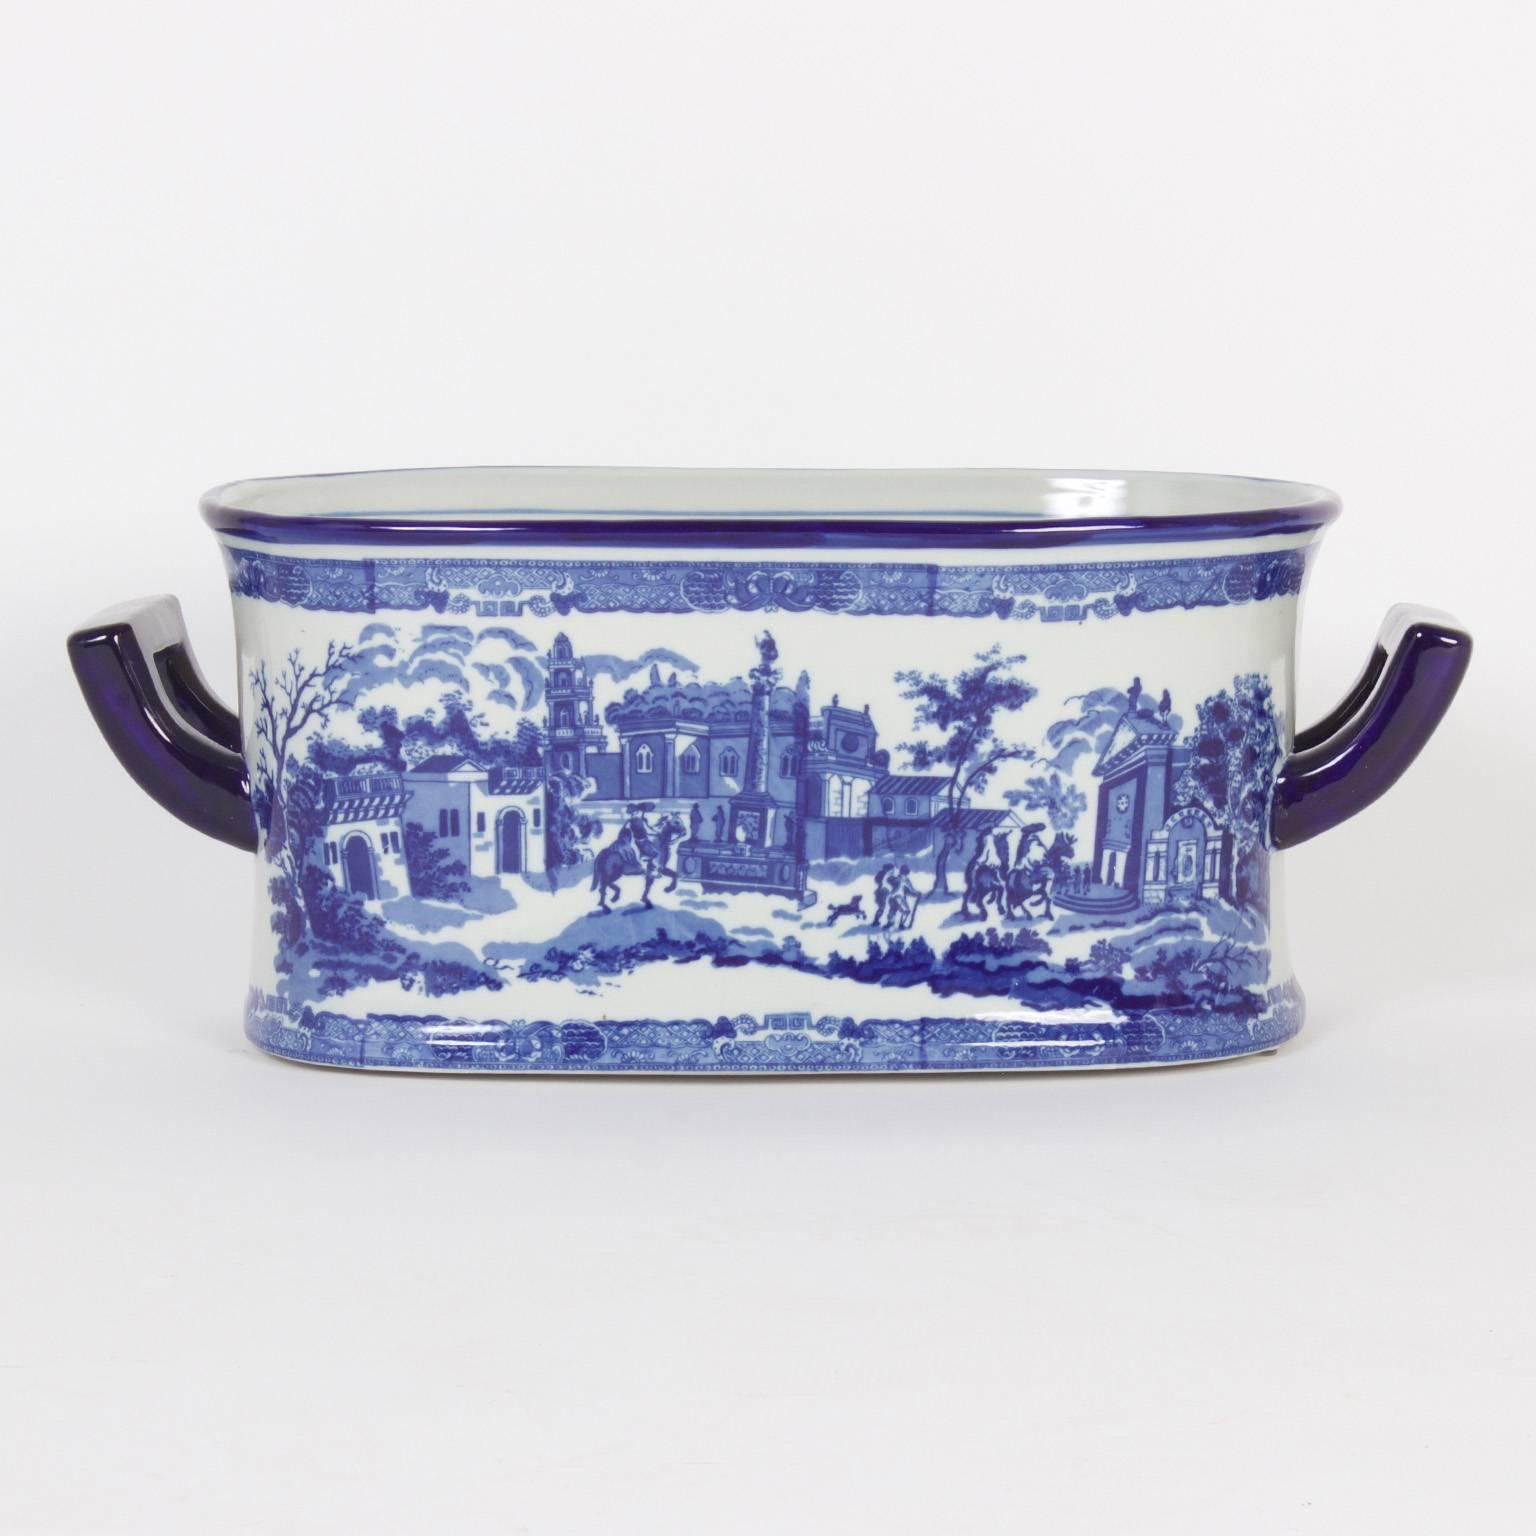 Blue and white porcelain Staffordshire style oblong planter or foot bath decorated in the manner of Chinese export, portraying an 18th century European street scene. Perfect for an orchid display.

.